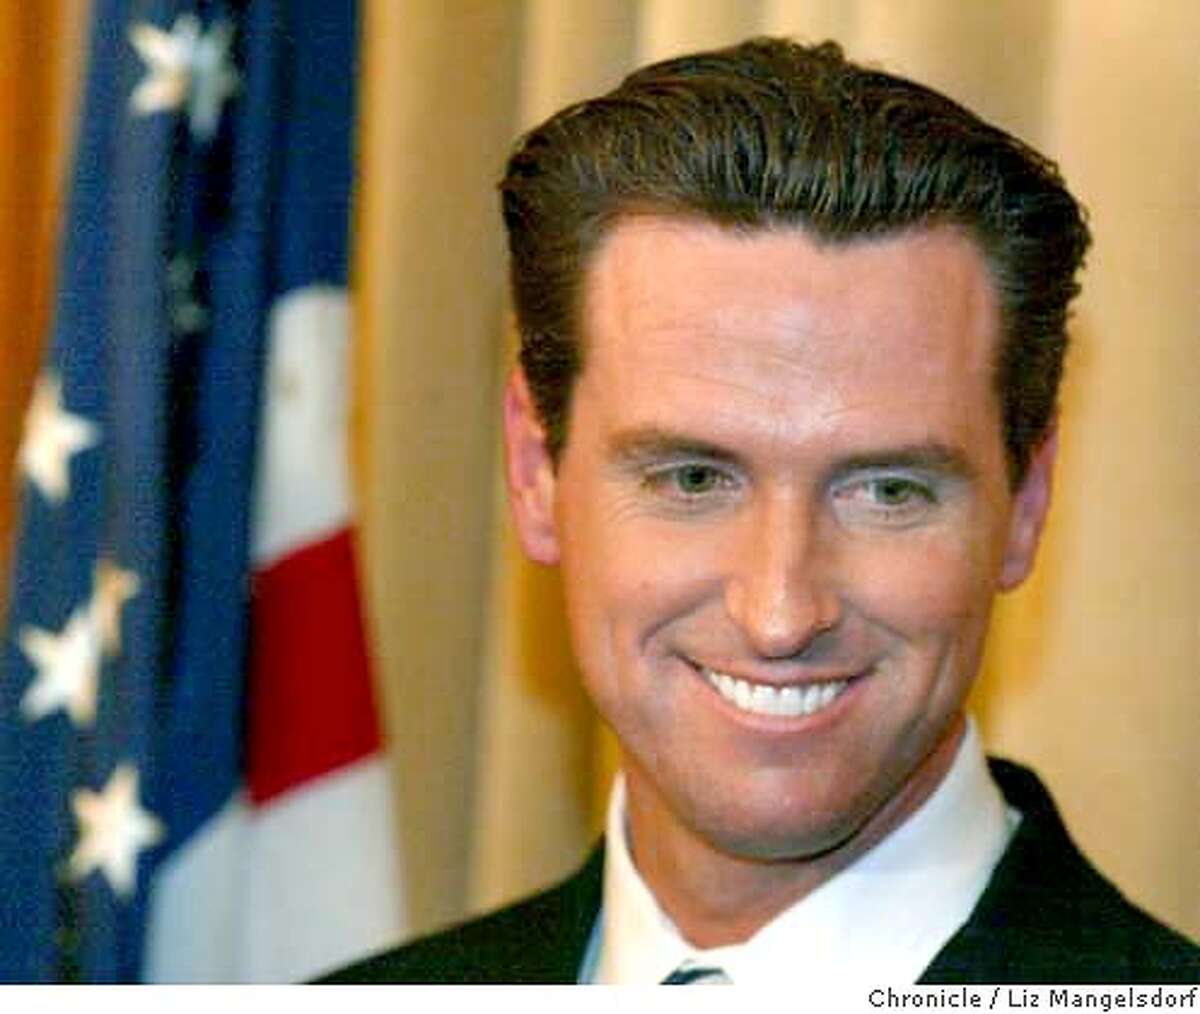 The Battle Over Same Sex Marriage Uncharted Territory Bushs Stance Led Newsom To Take Action 